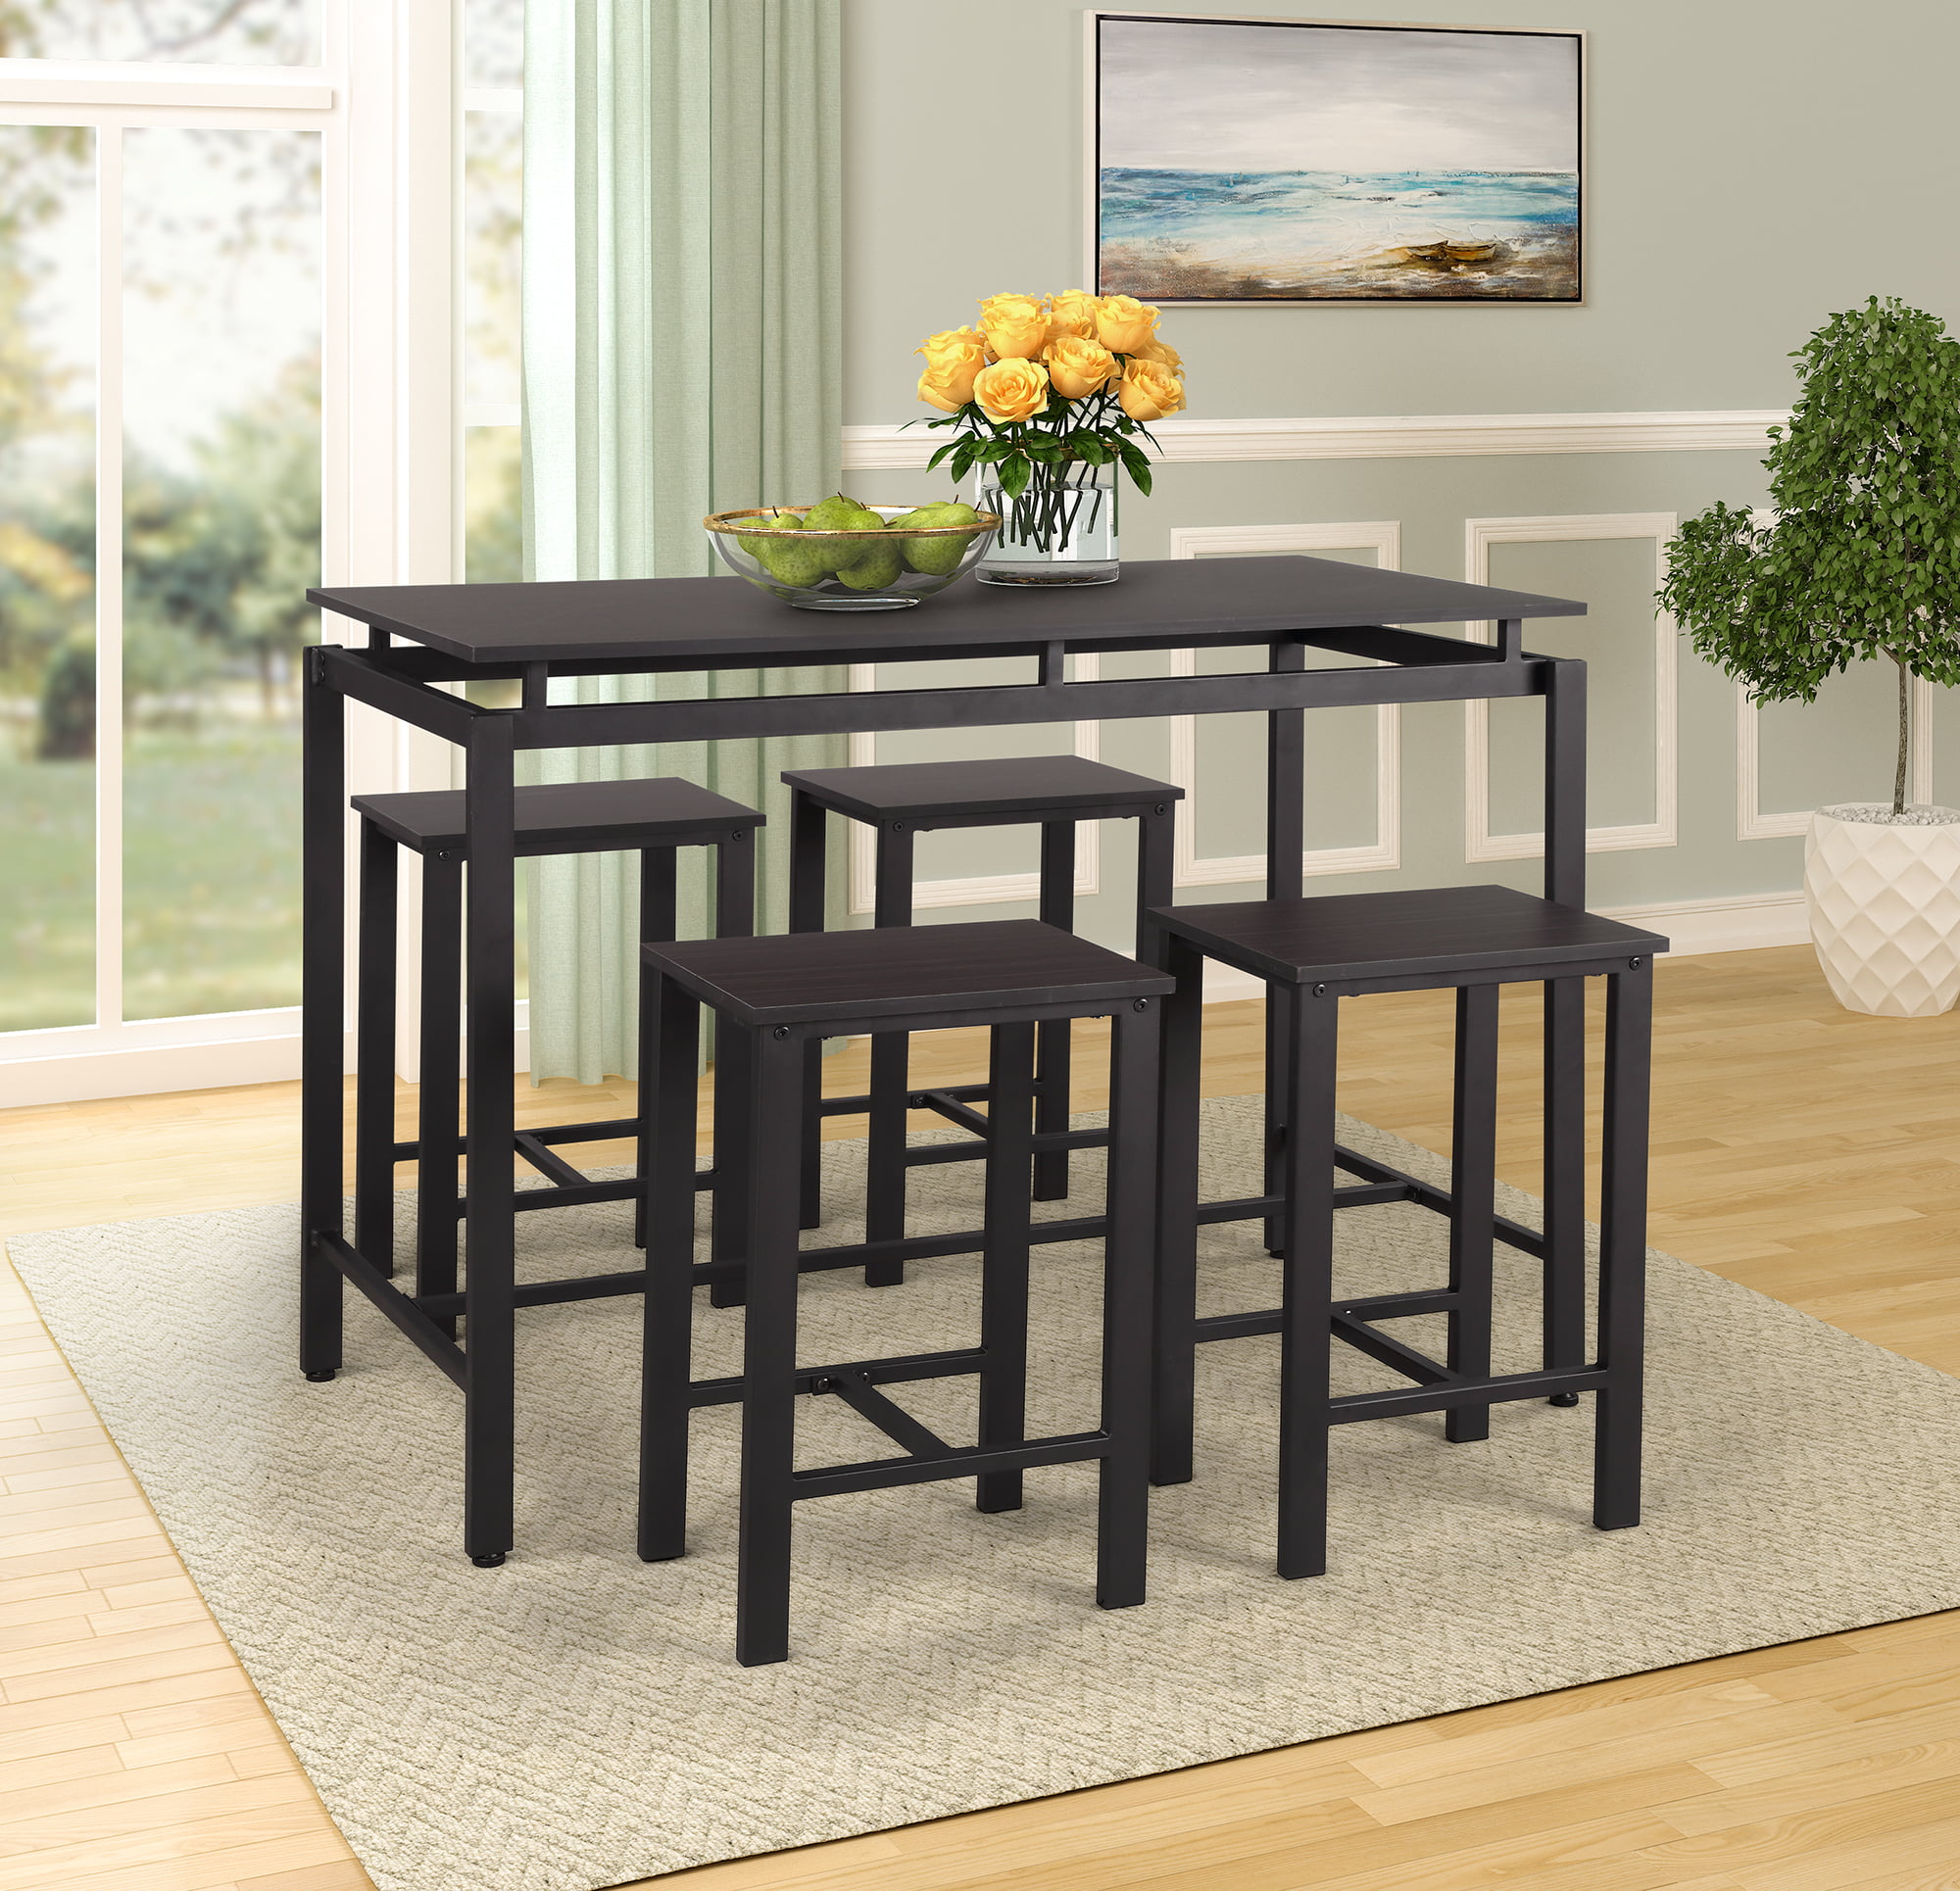 Bar Style Table And Chairs, Bar Style Dining Table And Chairs